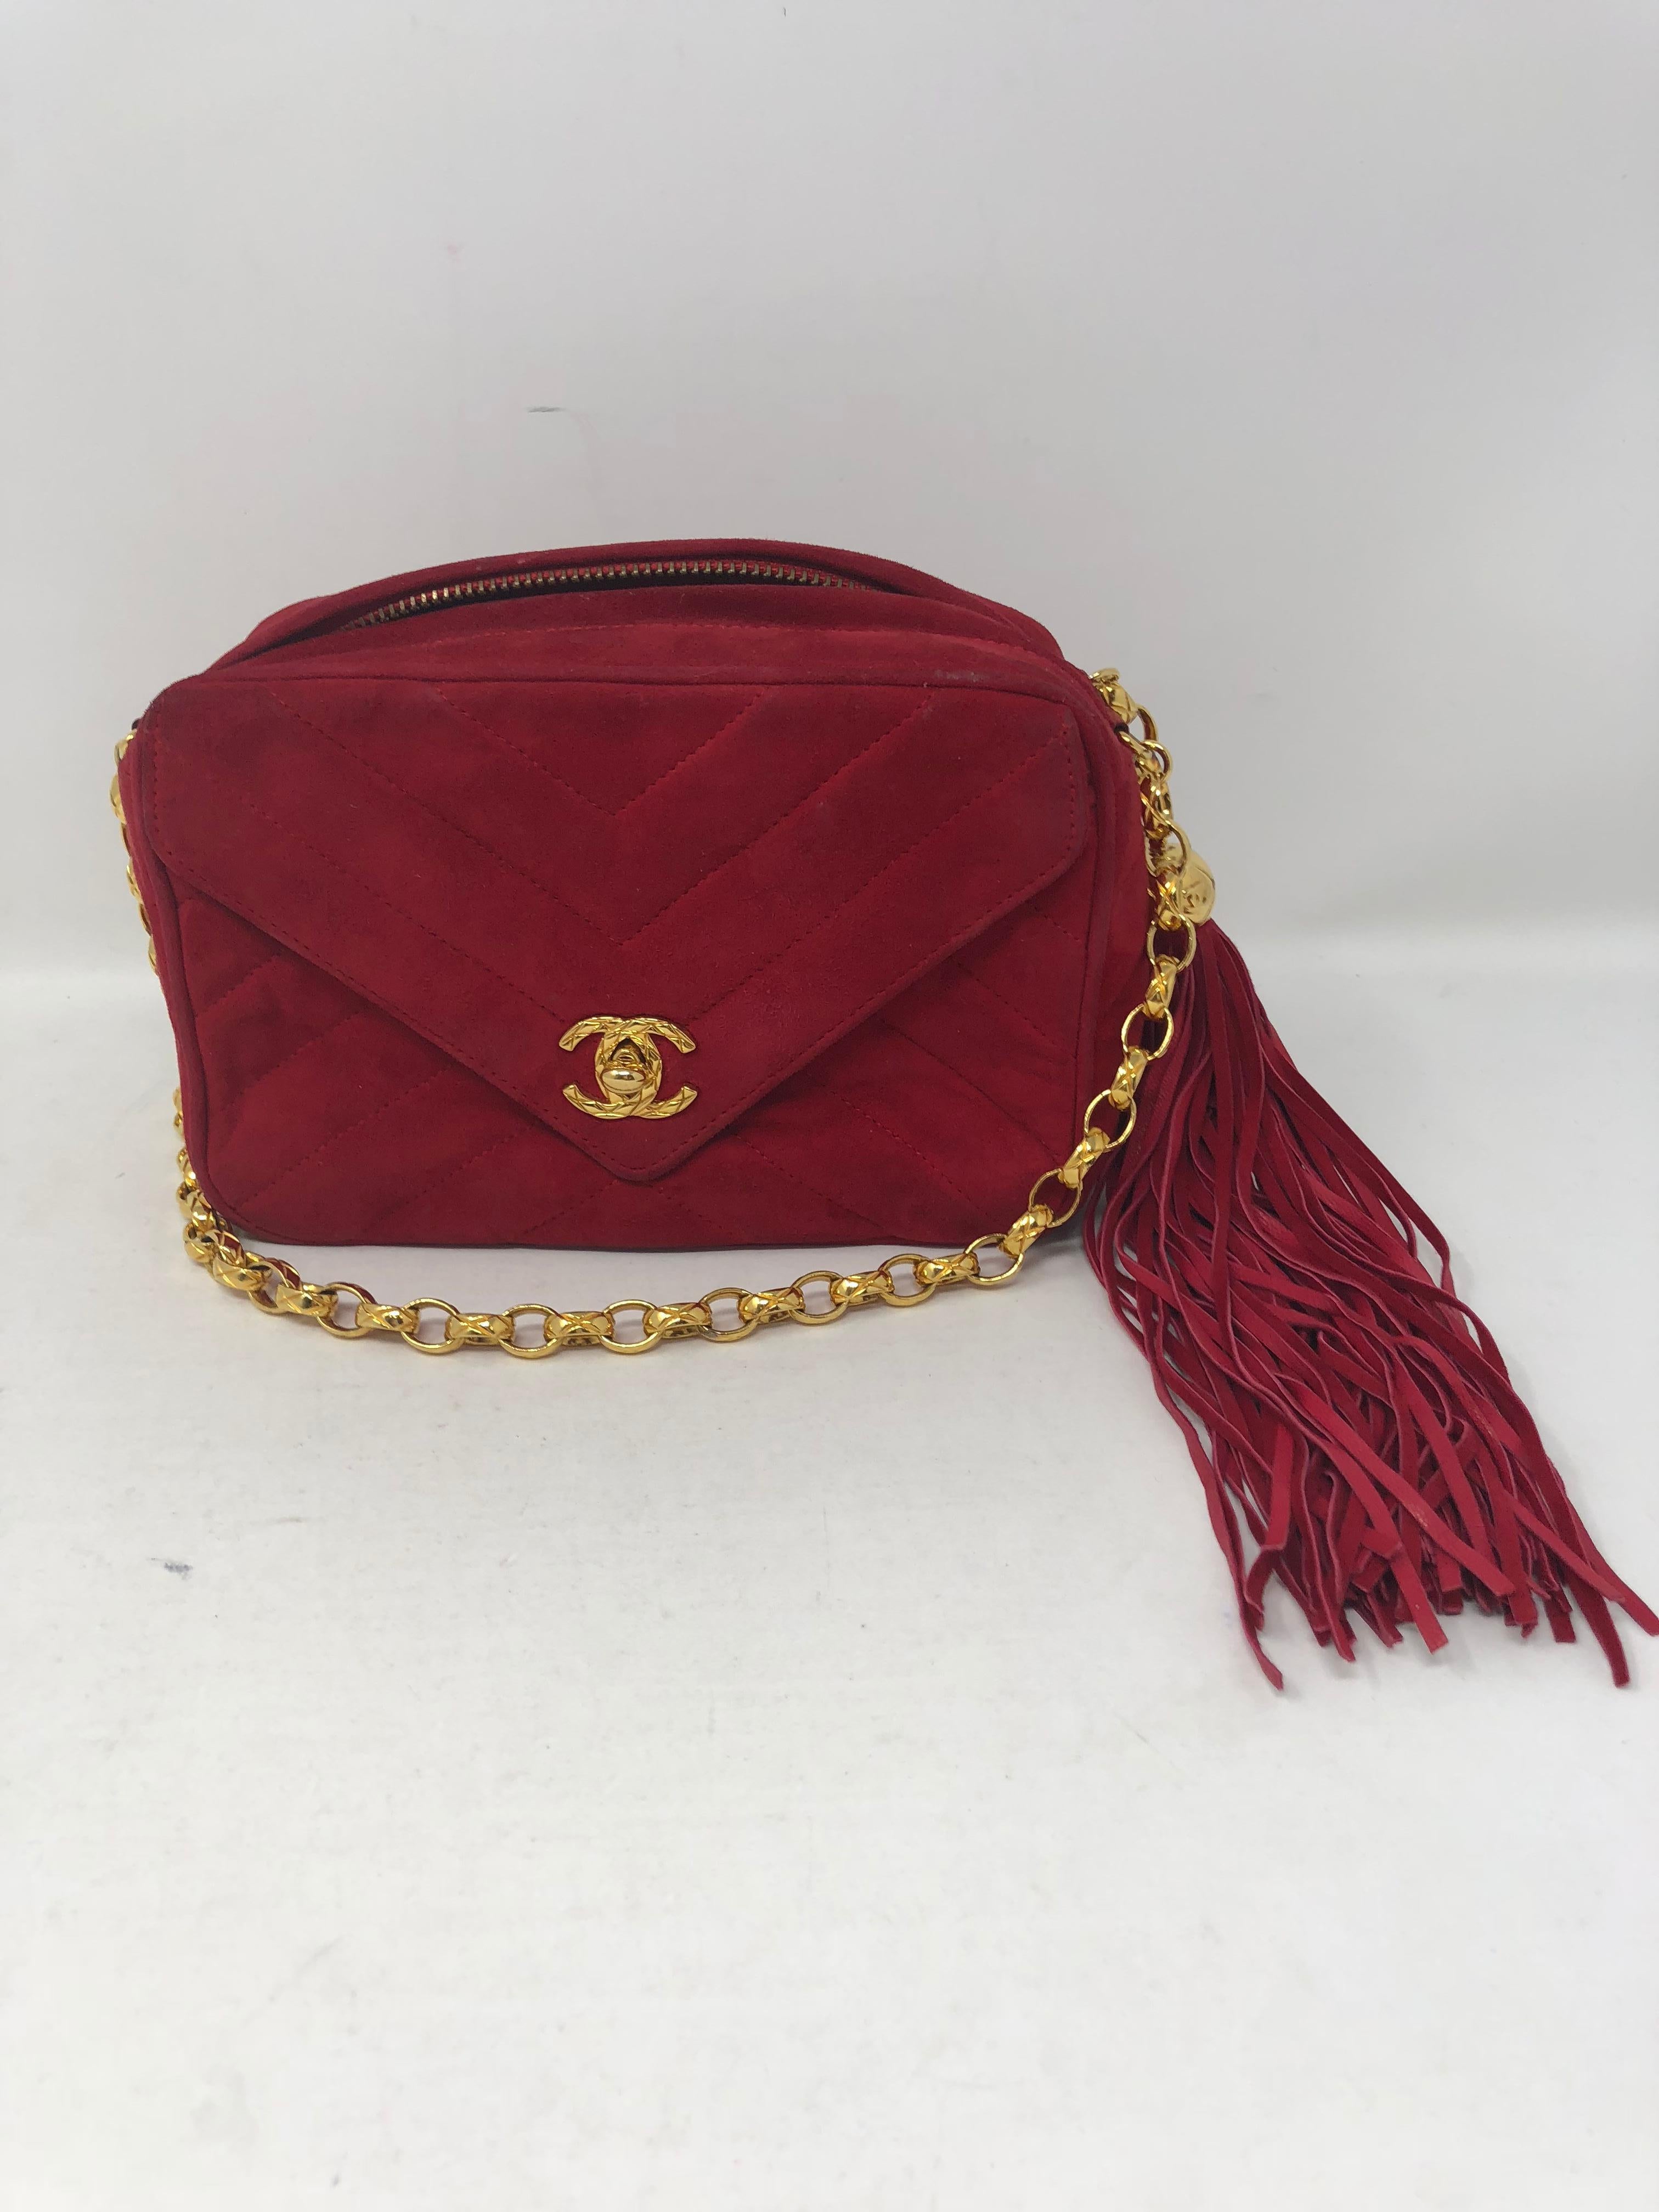 Chanel Red Suede Bag with Fringe  1